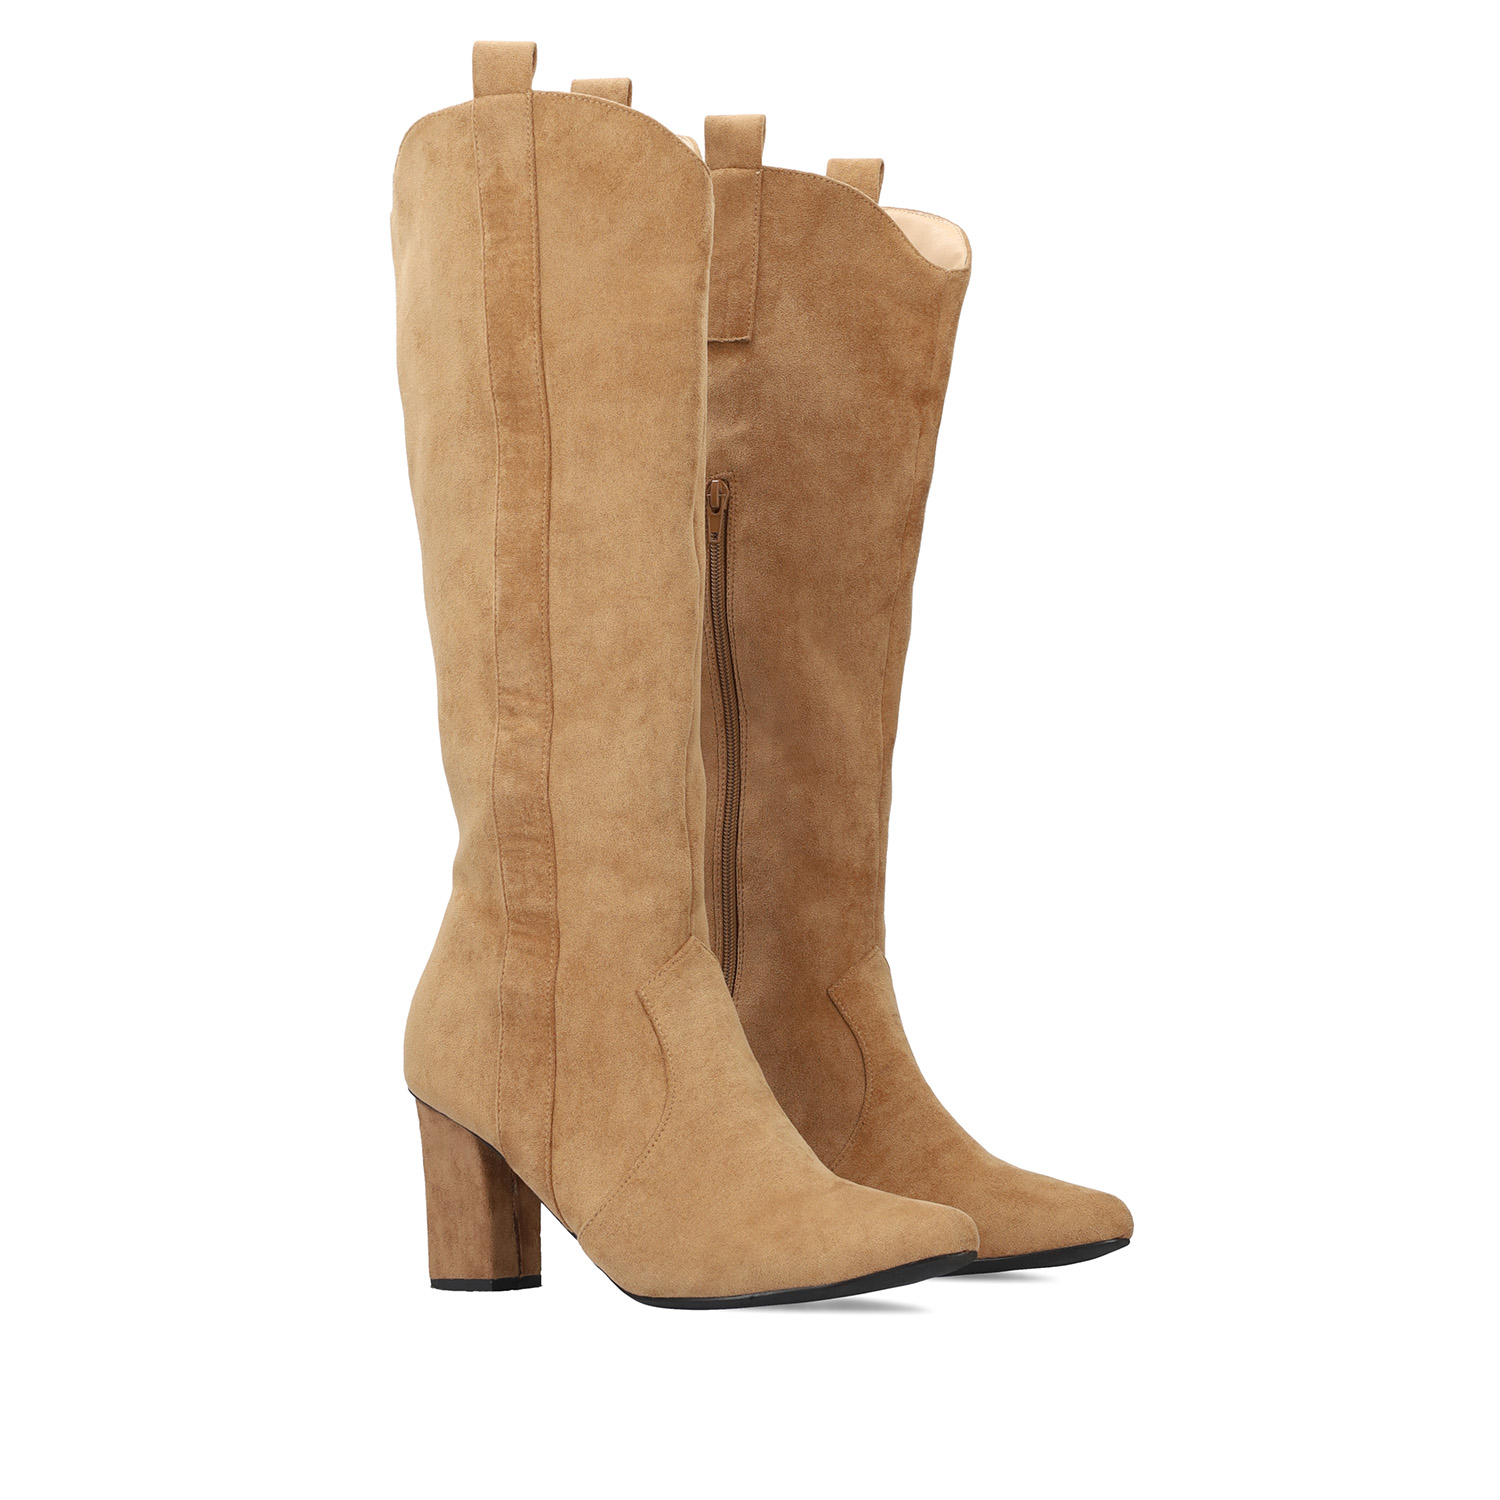 Heeled high boots in brown faux suede. 